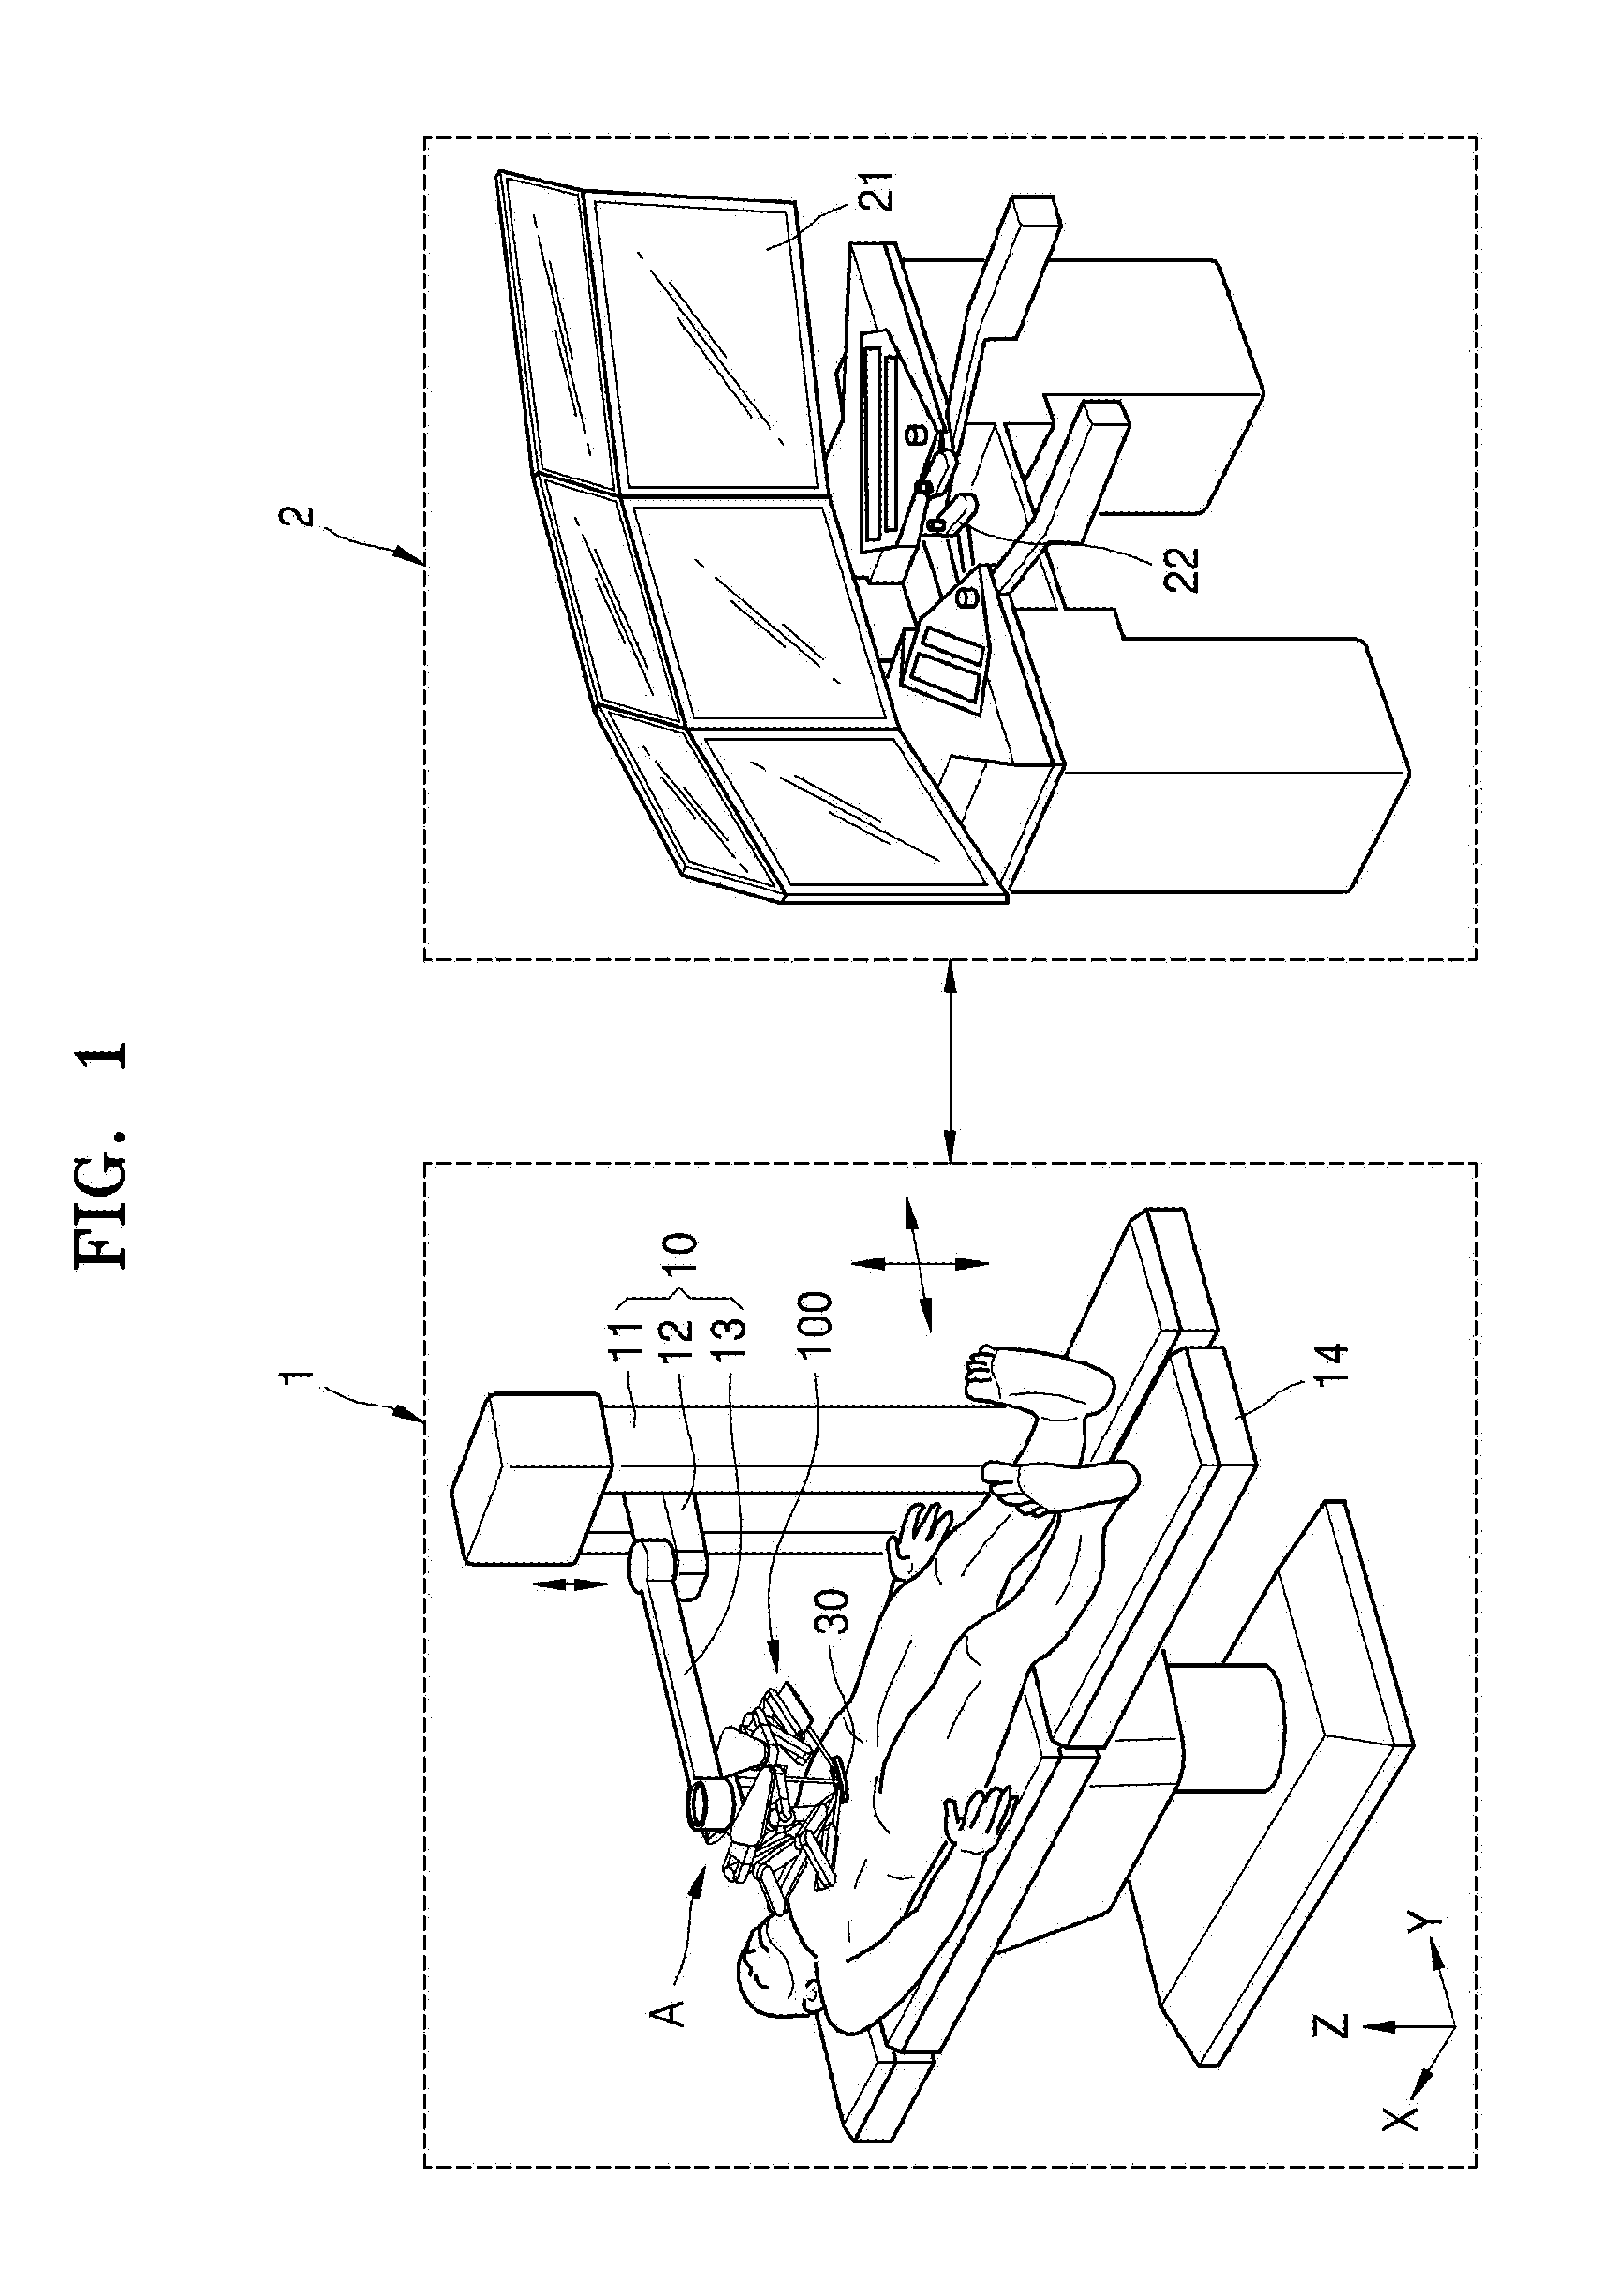 Surgical robot system and method of operating the same